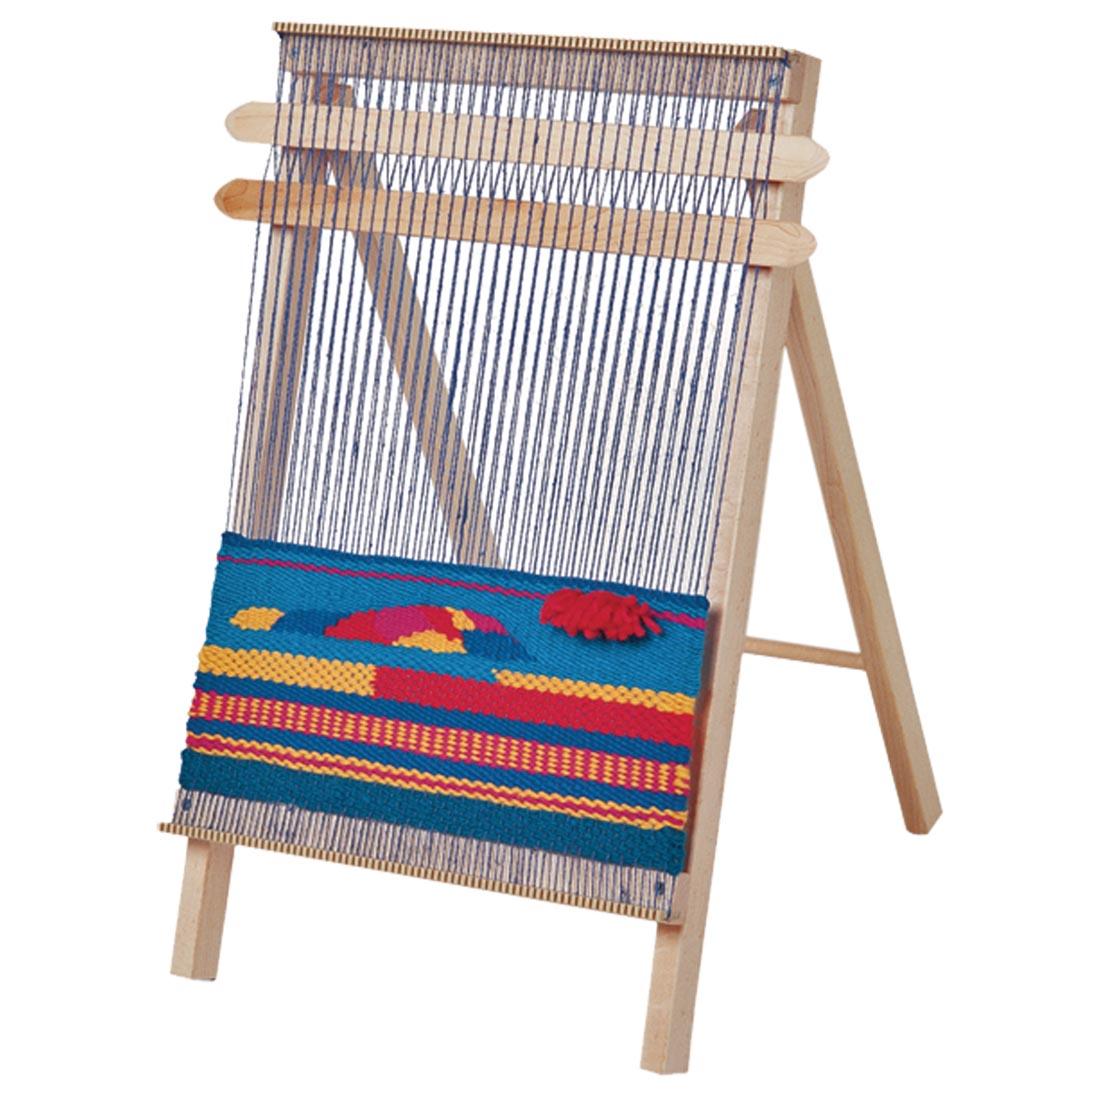 Schacht Spindle Co. School Loom shown with a weaving project started